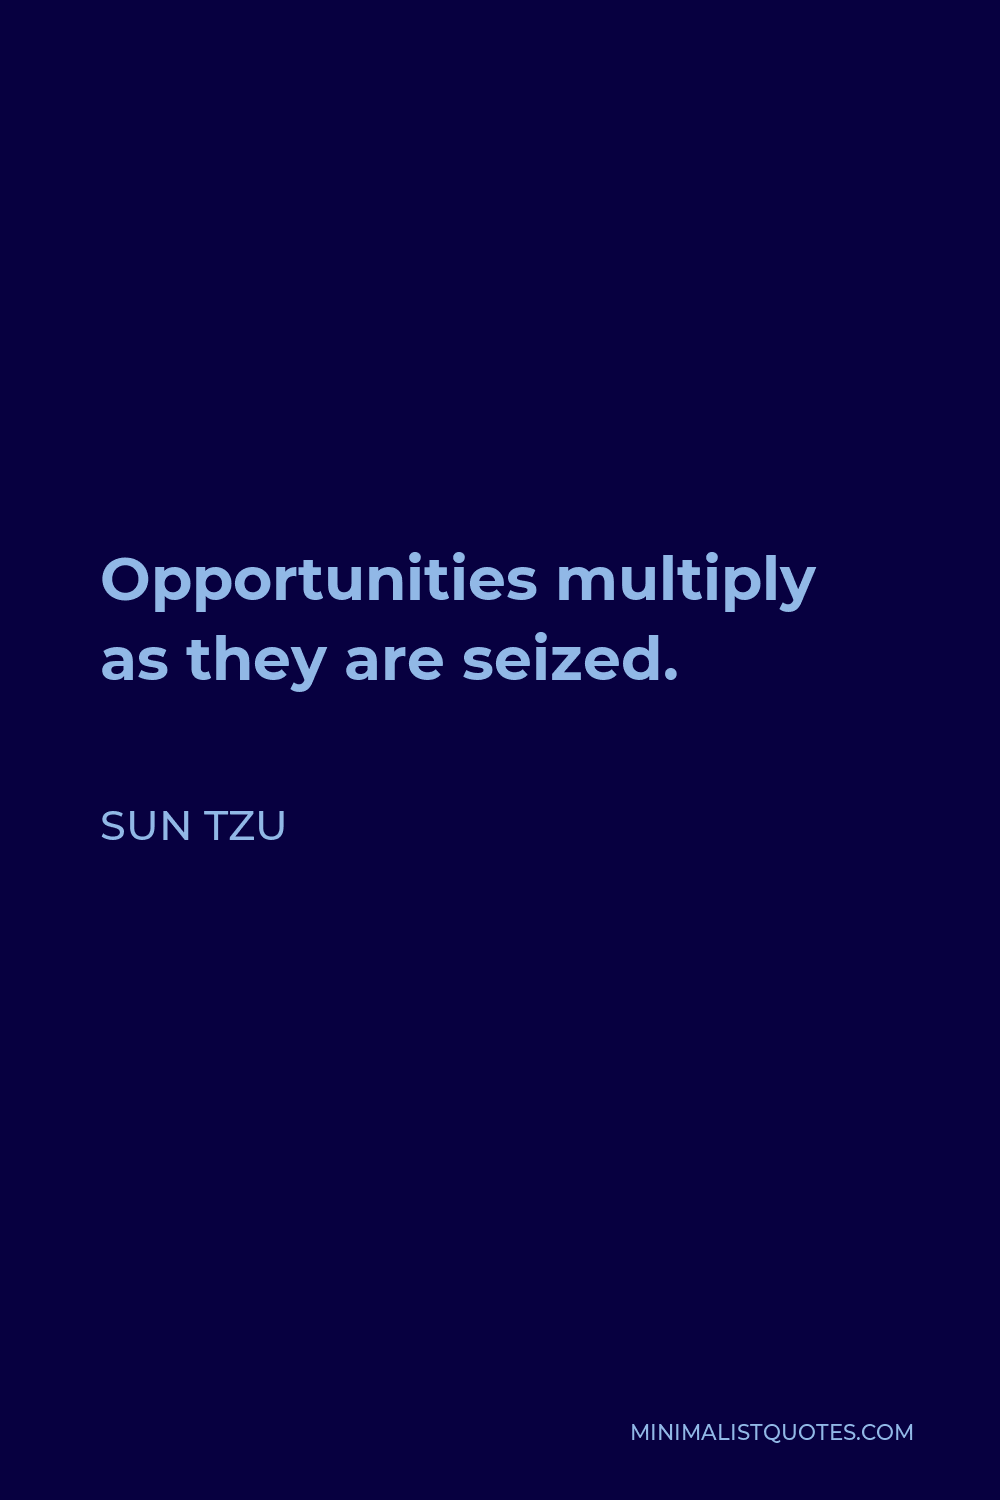 Sun Tzu Quote - Opportunities multiply as they are seized.